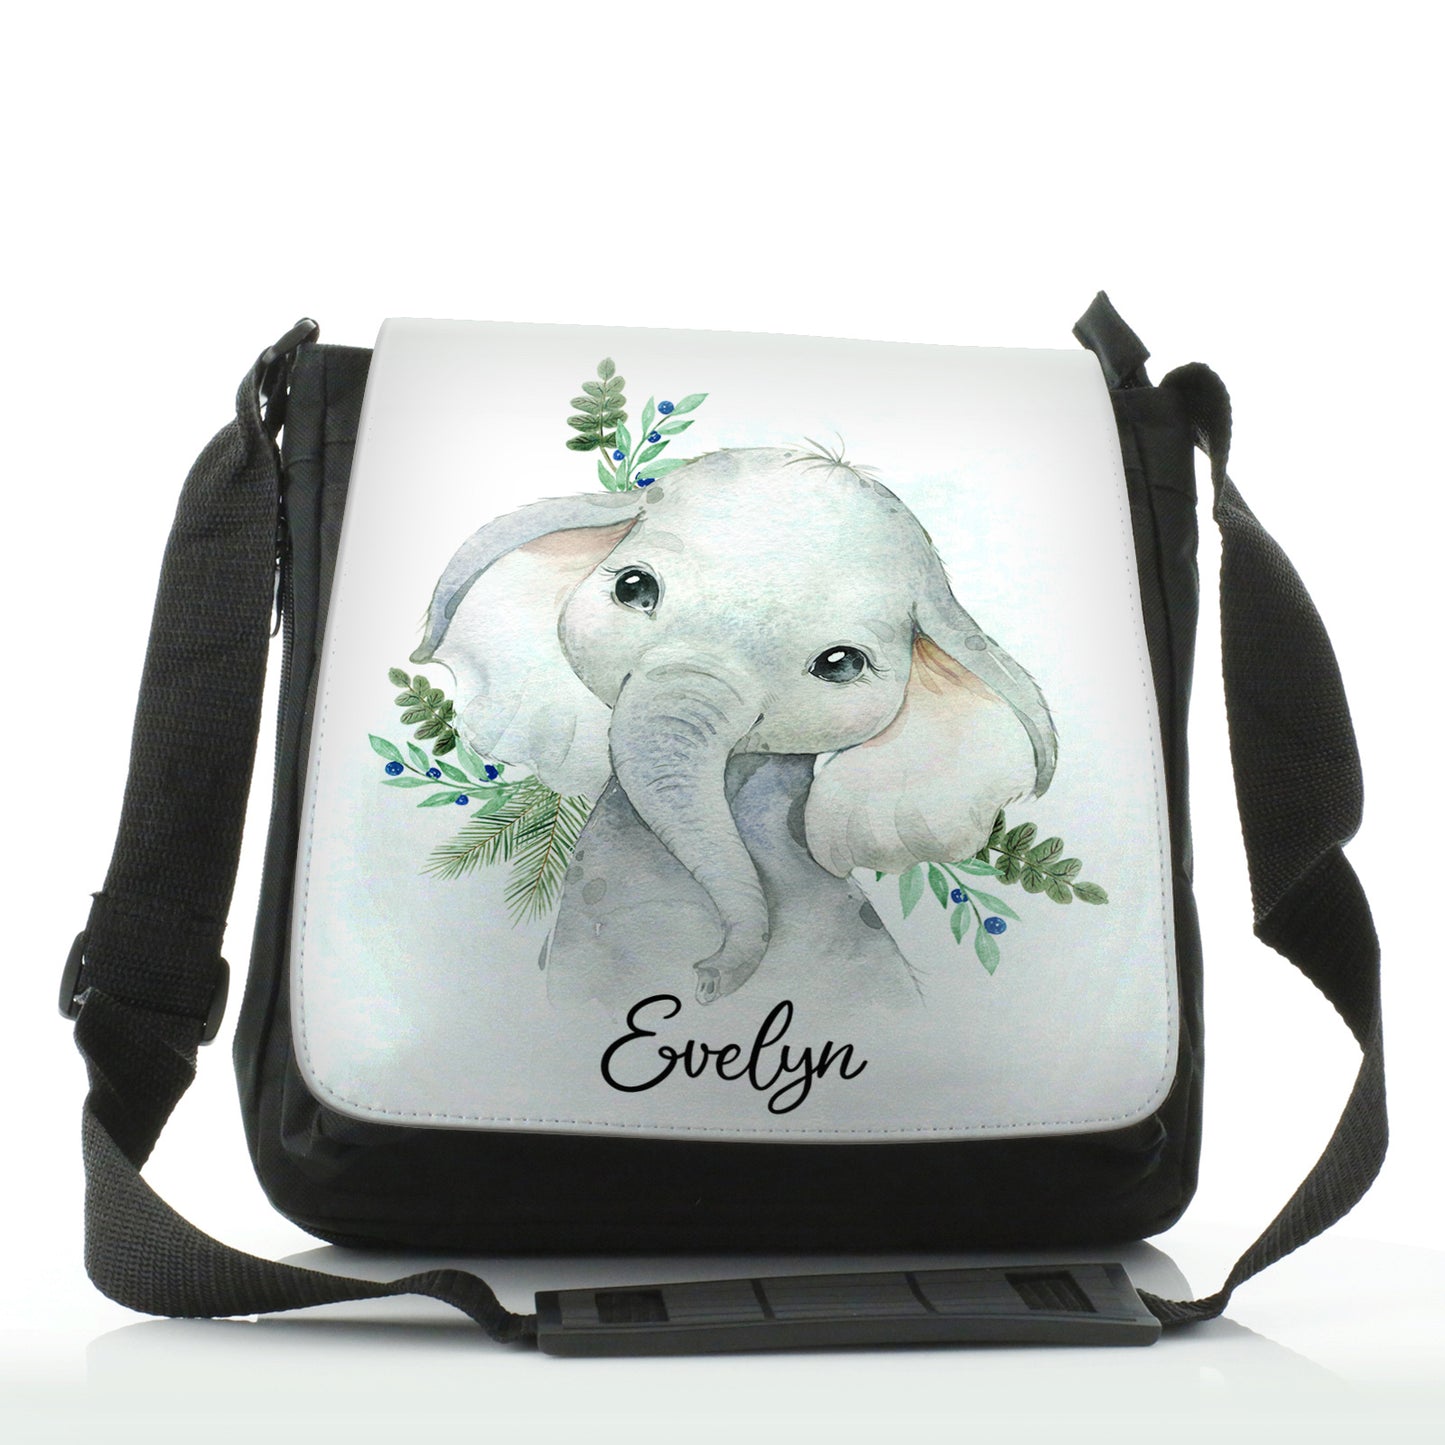 Personalised Shoulder Bag with Elephant Blue Berries and Cute Text